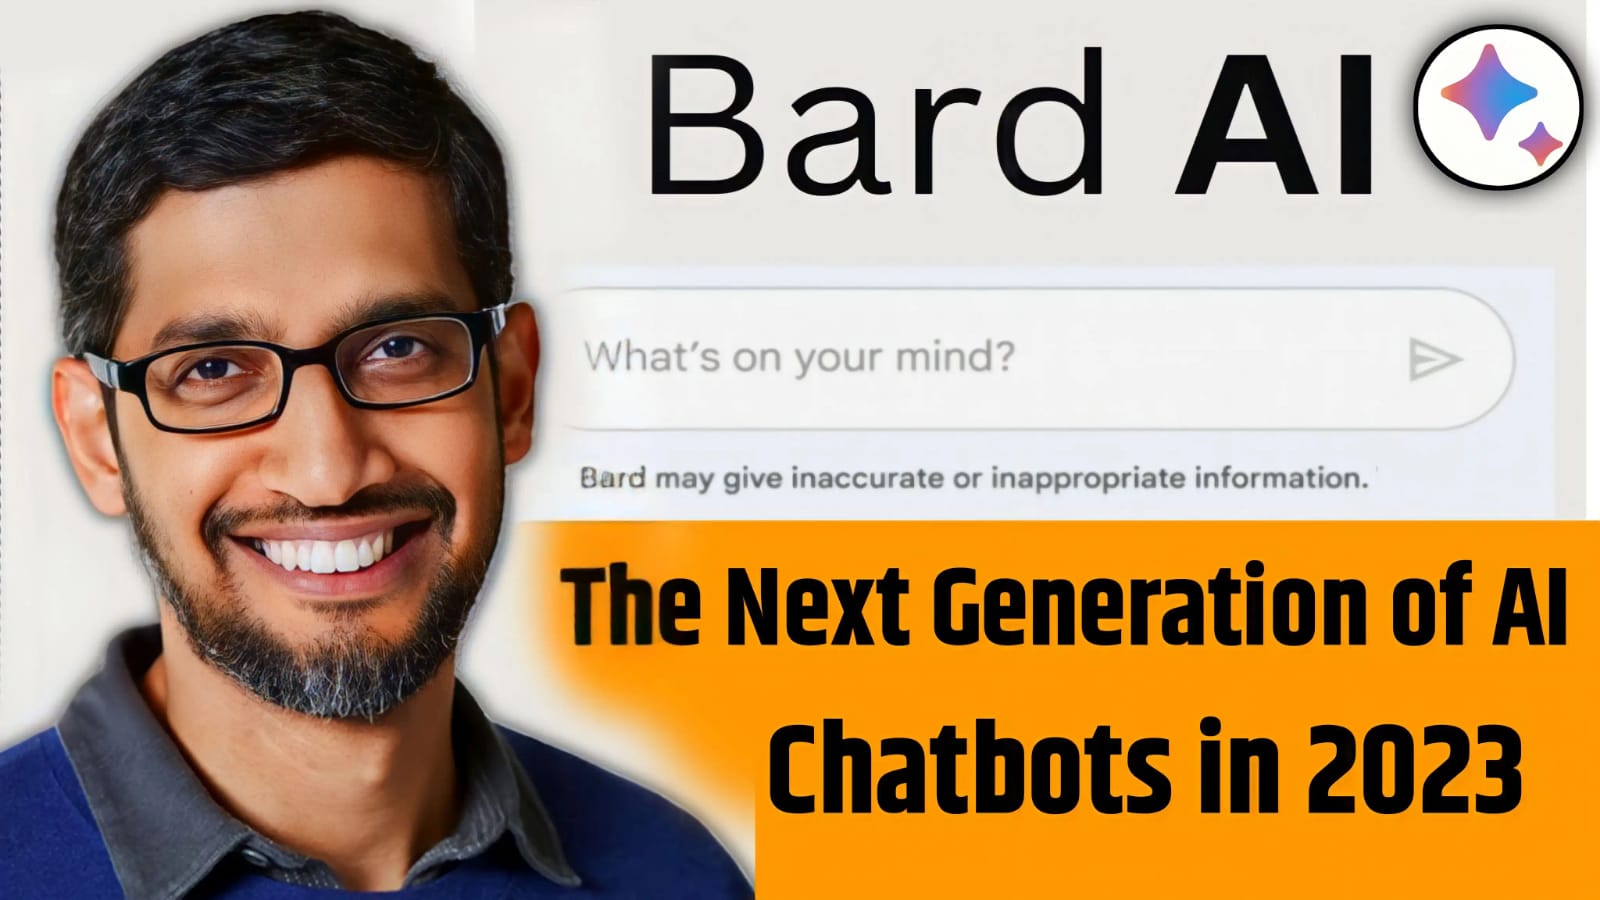 The Next Generation of AI Chatbots in 2023